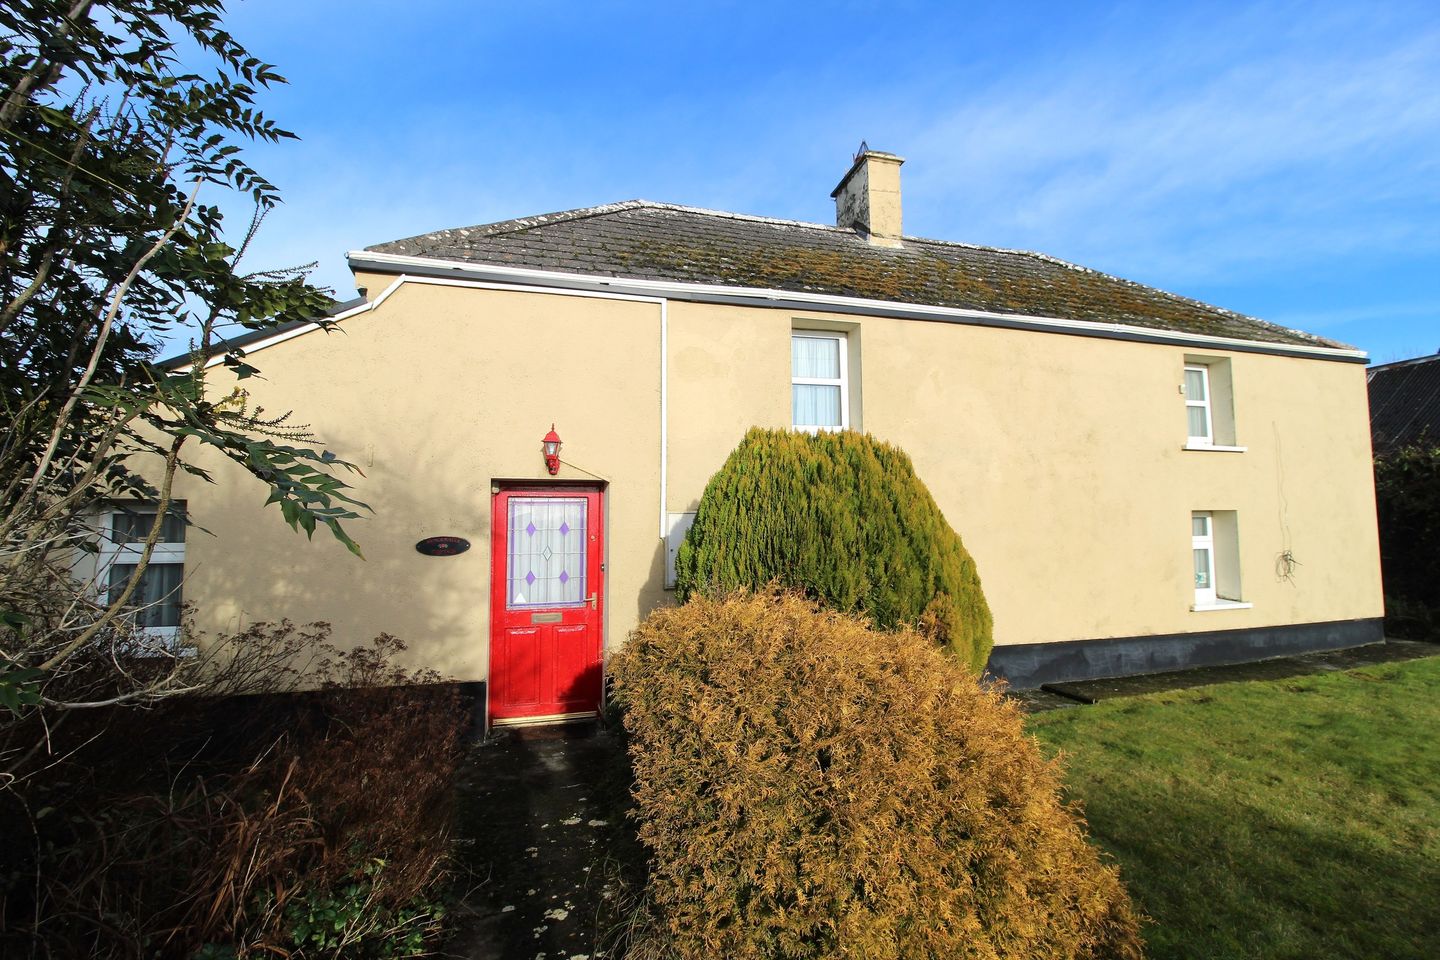 Blackwater Cottage, Clonever, Shannonbridge, Co. Offaly, N37X201